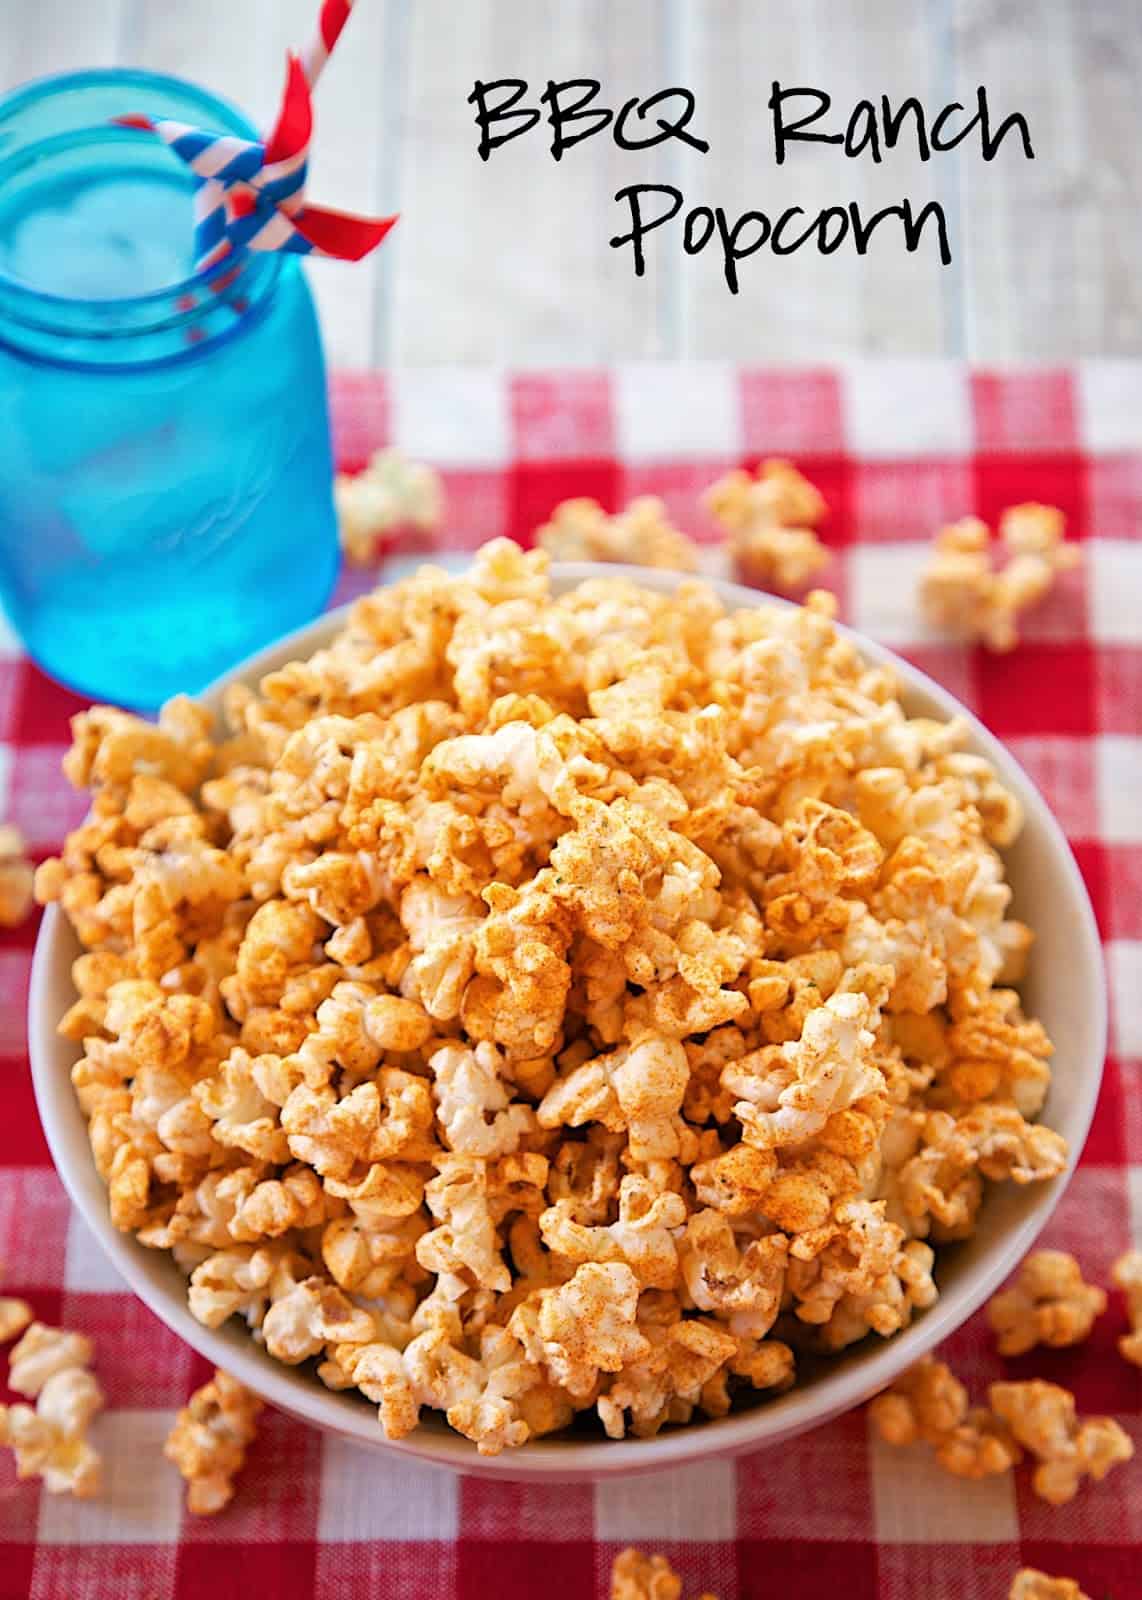 BBQ Ranch Popcorn Recipe - microwave popcorn seasoned with Ranch dressing mix, paprika and brown sugar. Great snack for your summer BBQ! Ready in 10 minutes!!